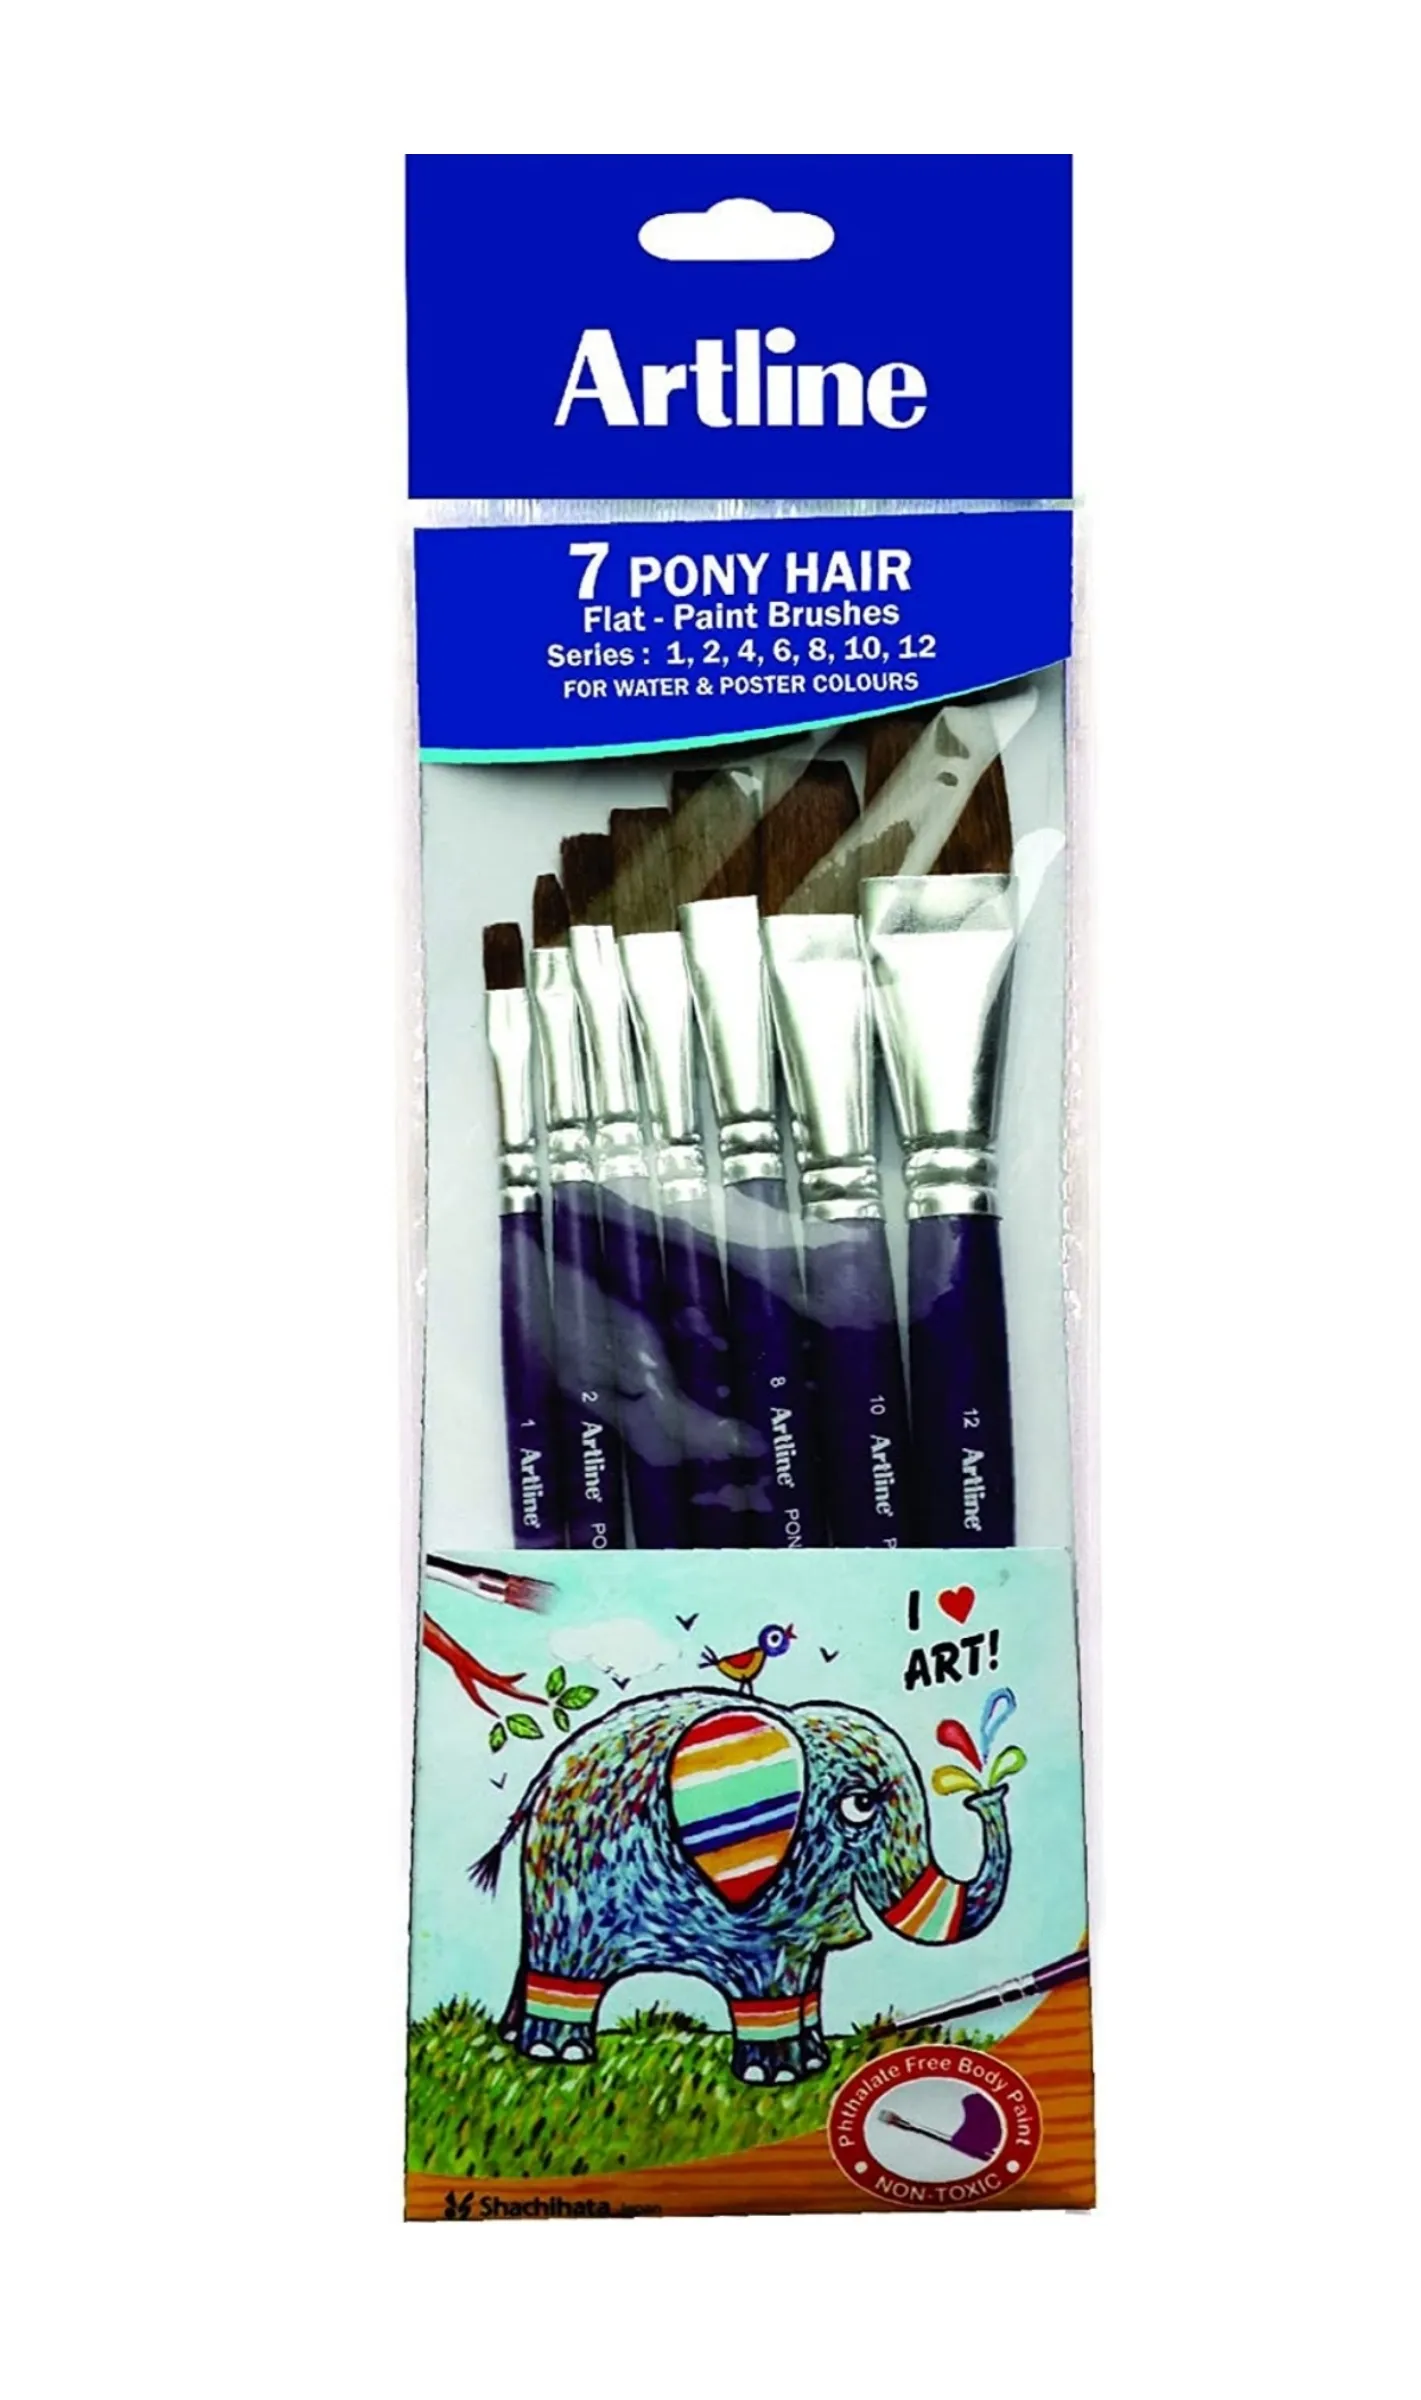 Artline 7 Flat Pony Hair Paint Brushes Set (Size 1,2,4,6,8,10,12) For Water & Poster Colours